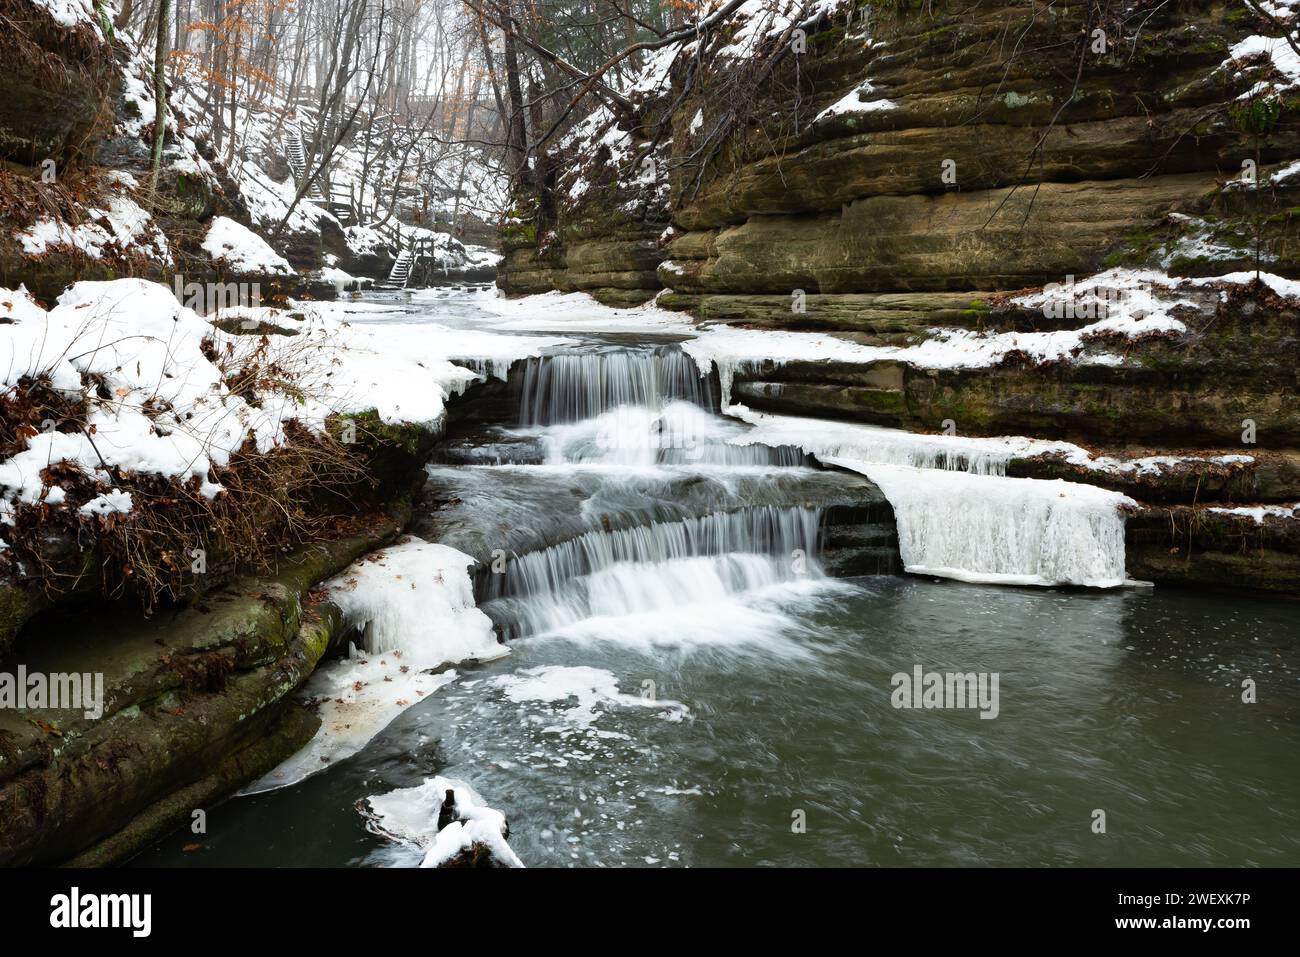 Water flowing down Giant's Bathtub as the snow melts at Matthiessen State Park, Illinois, USA. Stock Photo